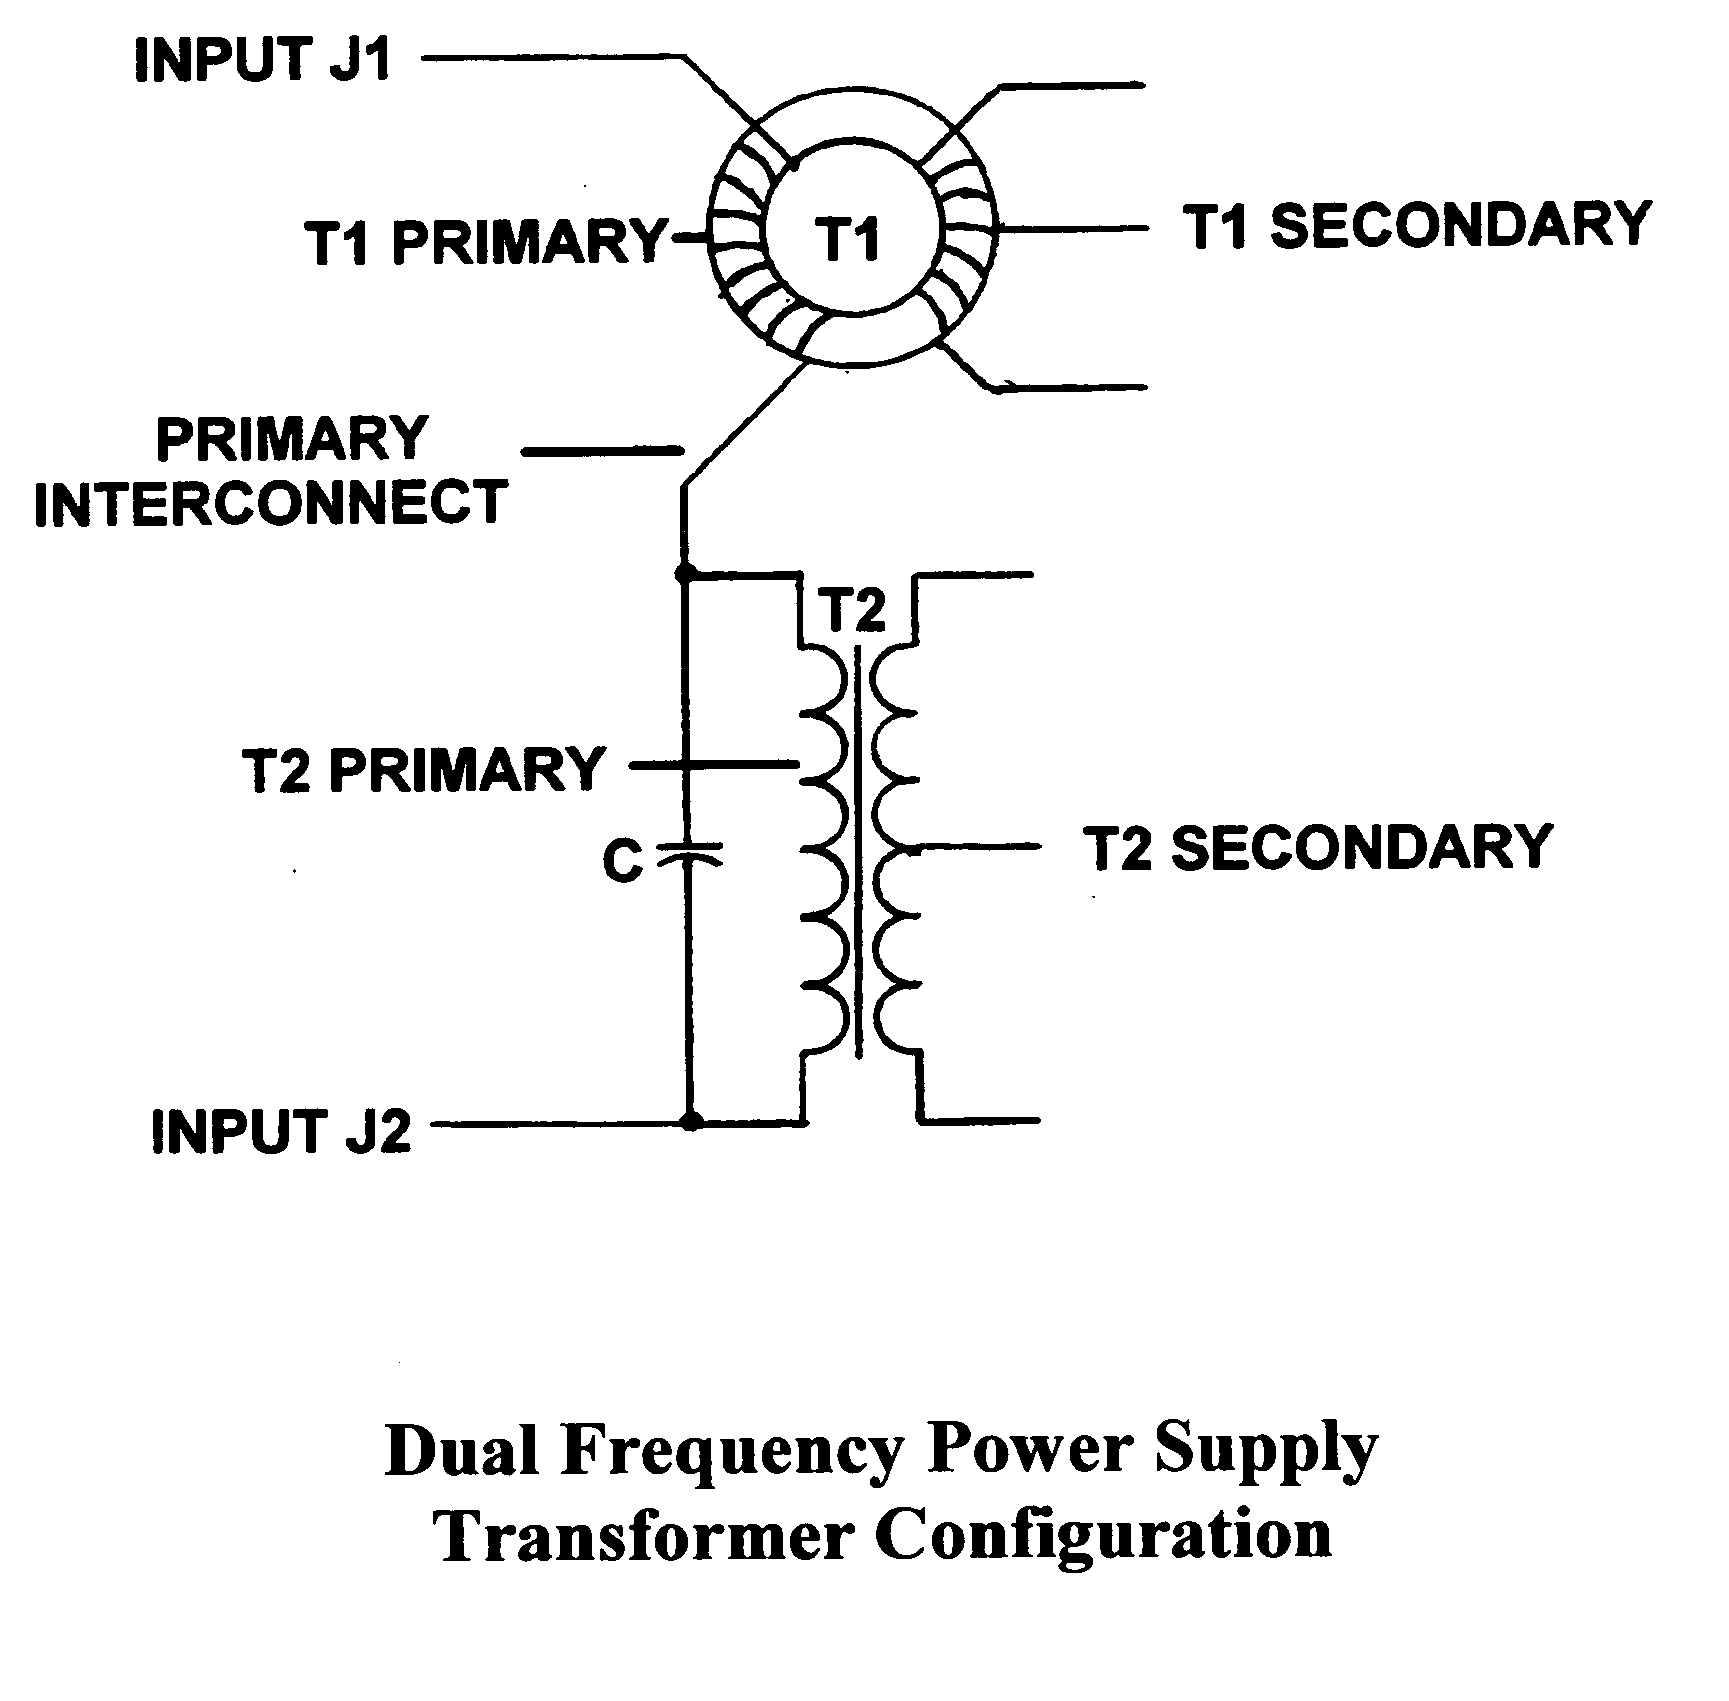 Methods and apparatus for constructing a power supply capable drawing power from fluorescent lamps